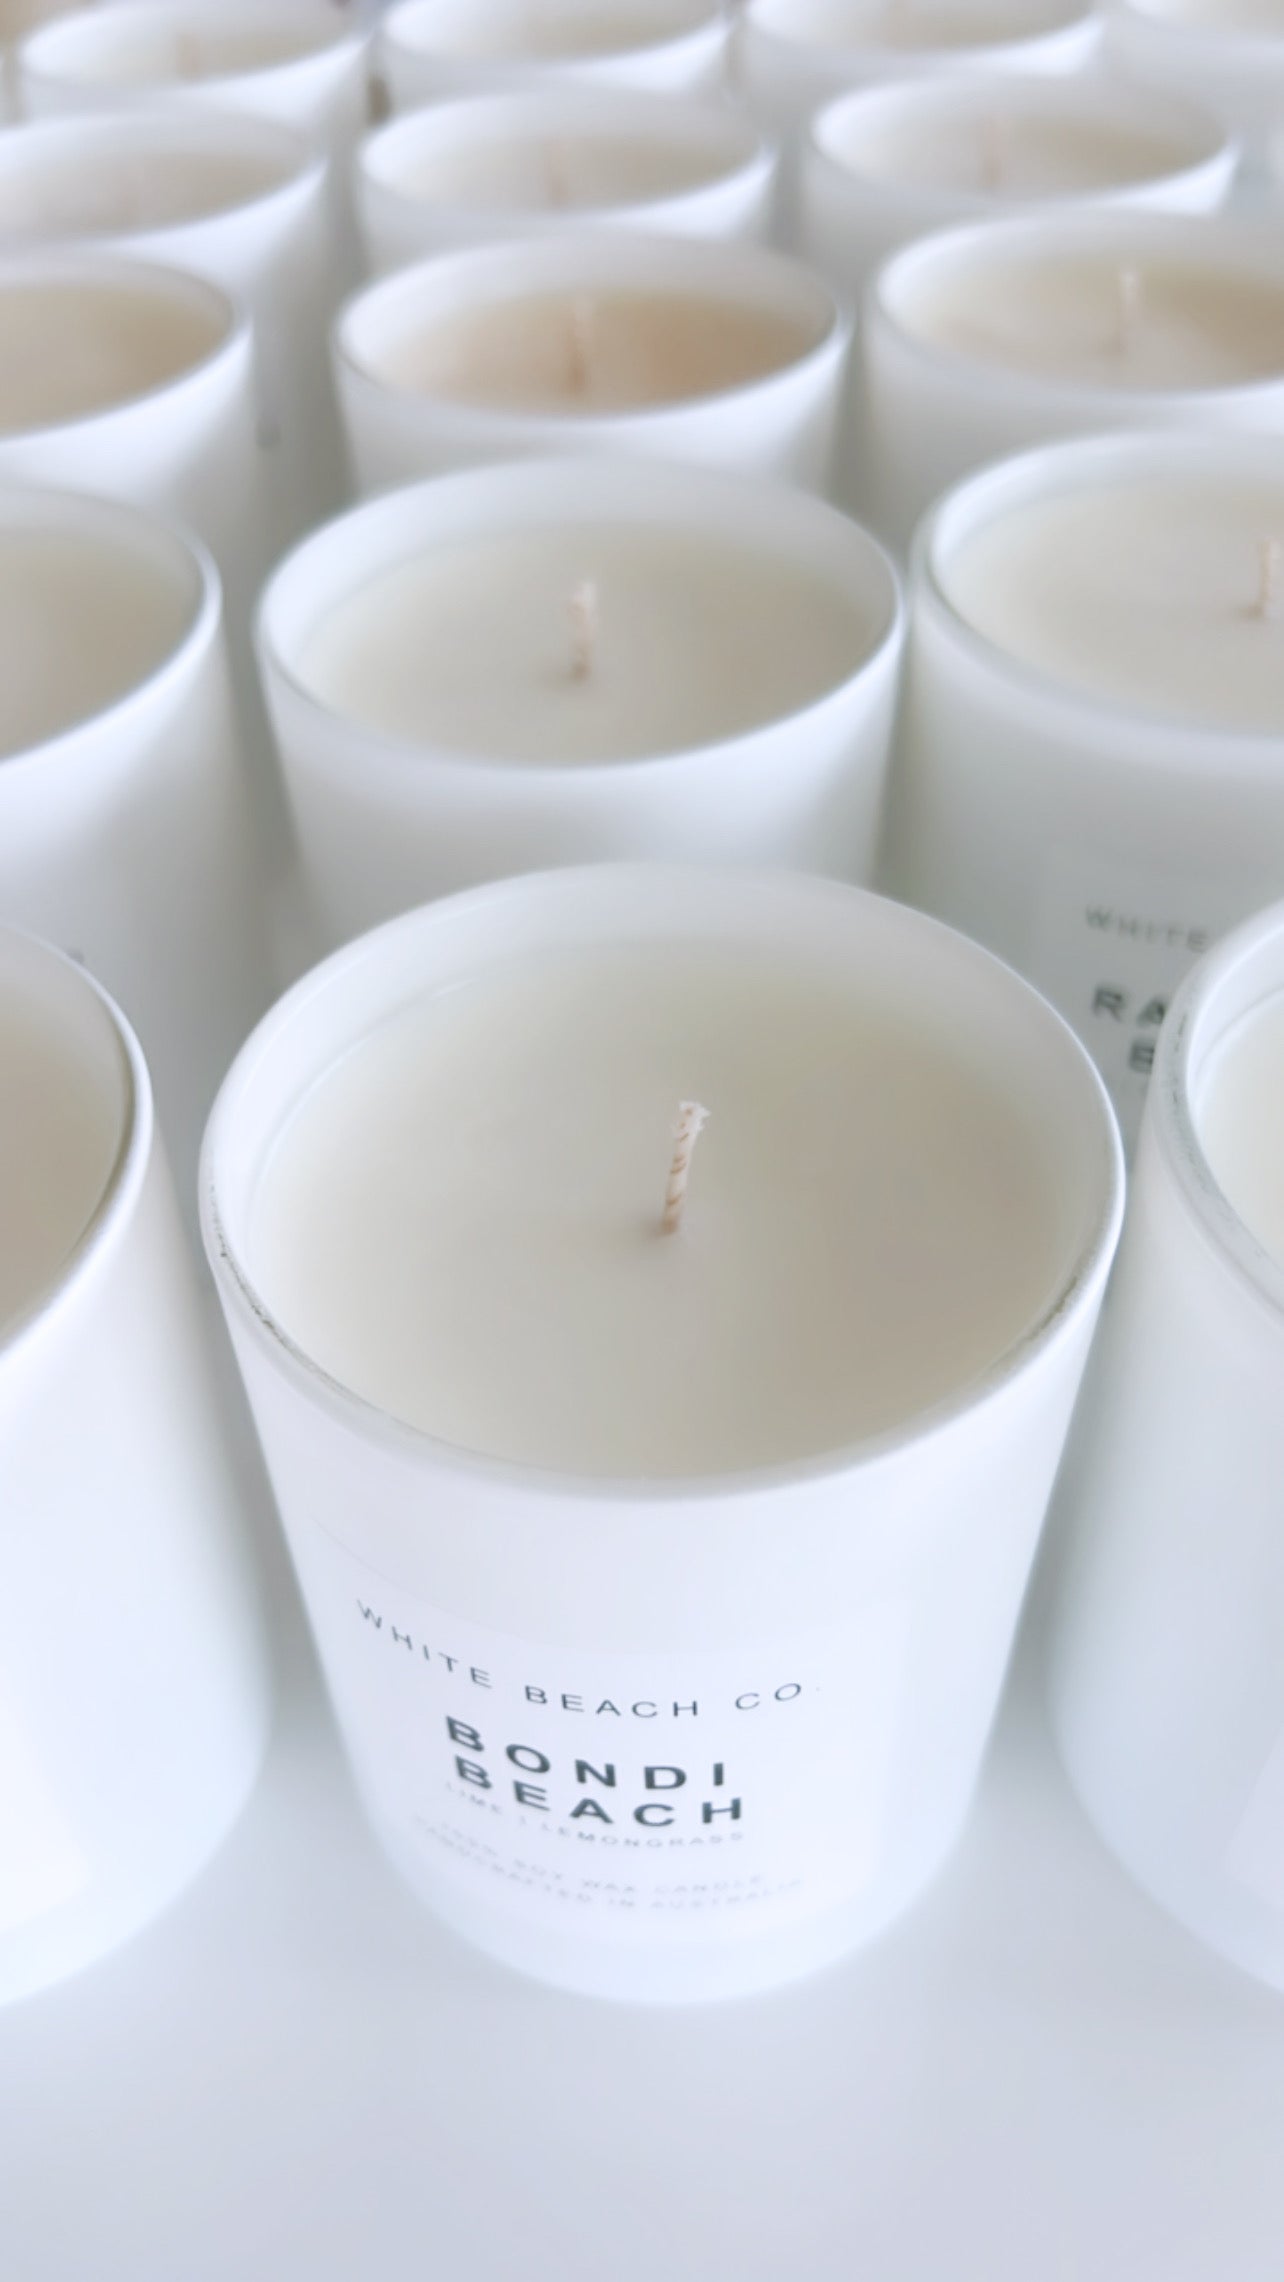 Bondi Beach Candle in Lime & Lemongrass Soy Candle